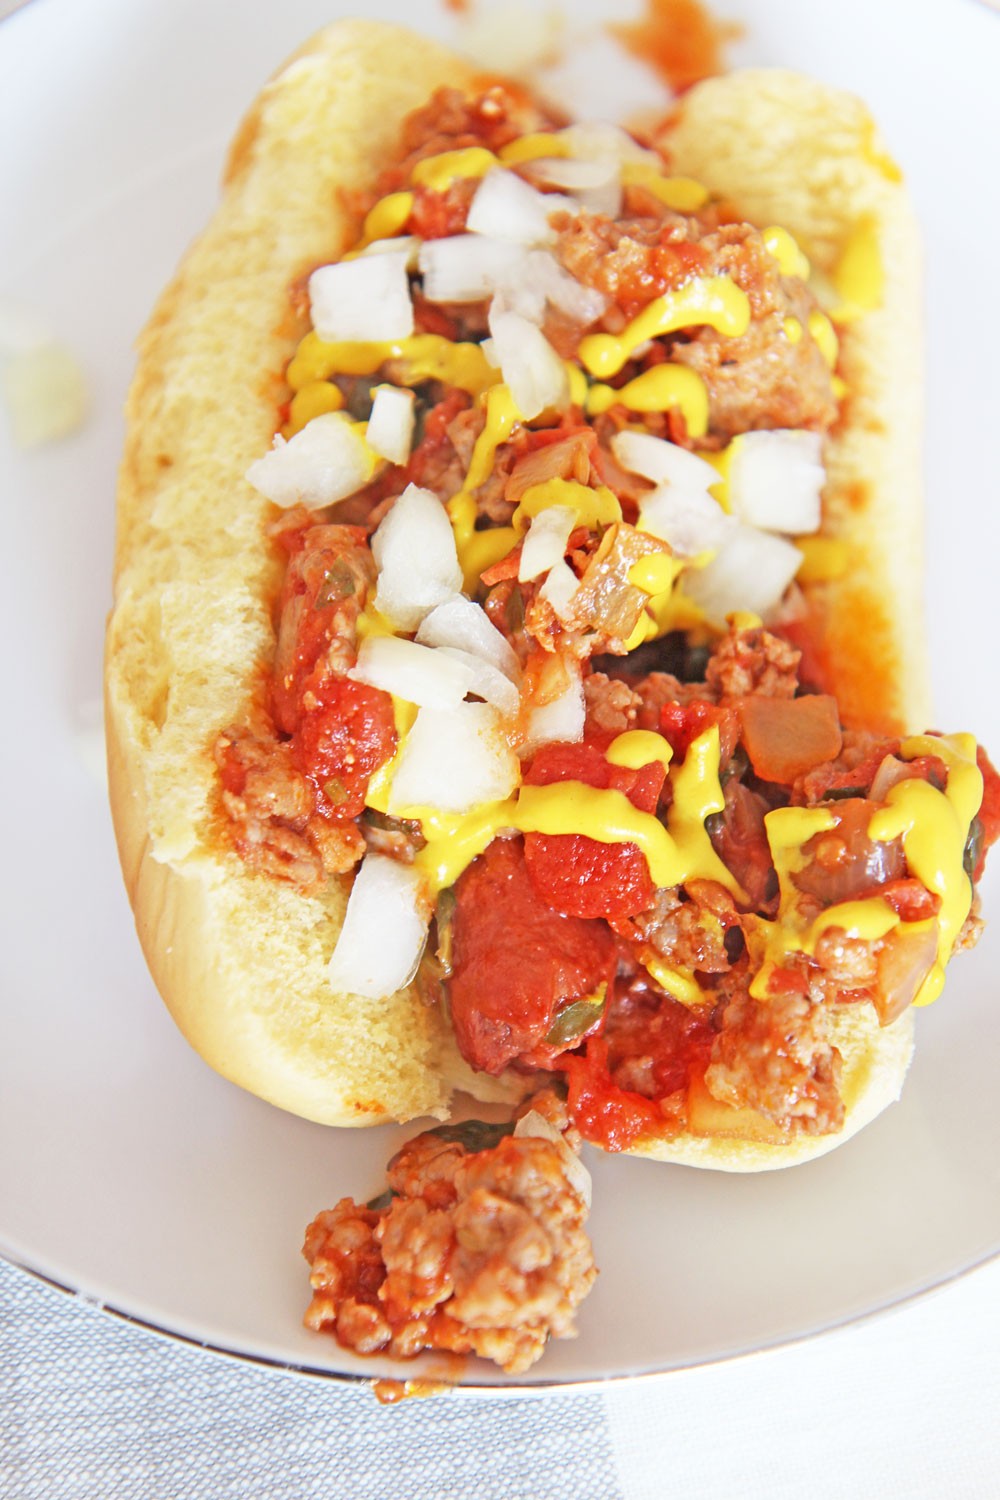 The Best Chili Hot Dog Recipe. Grab your sweet Italian sausage, spicy Italian sausage, crushed tomatoes, onion, garlic, and all your seasonings. This is an easy 30 minute meal with a happy dinner idea. www.ChopHappy.com #chiilidog #hotdog